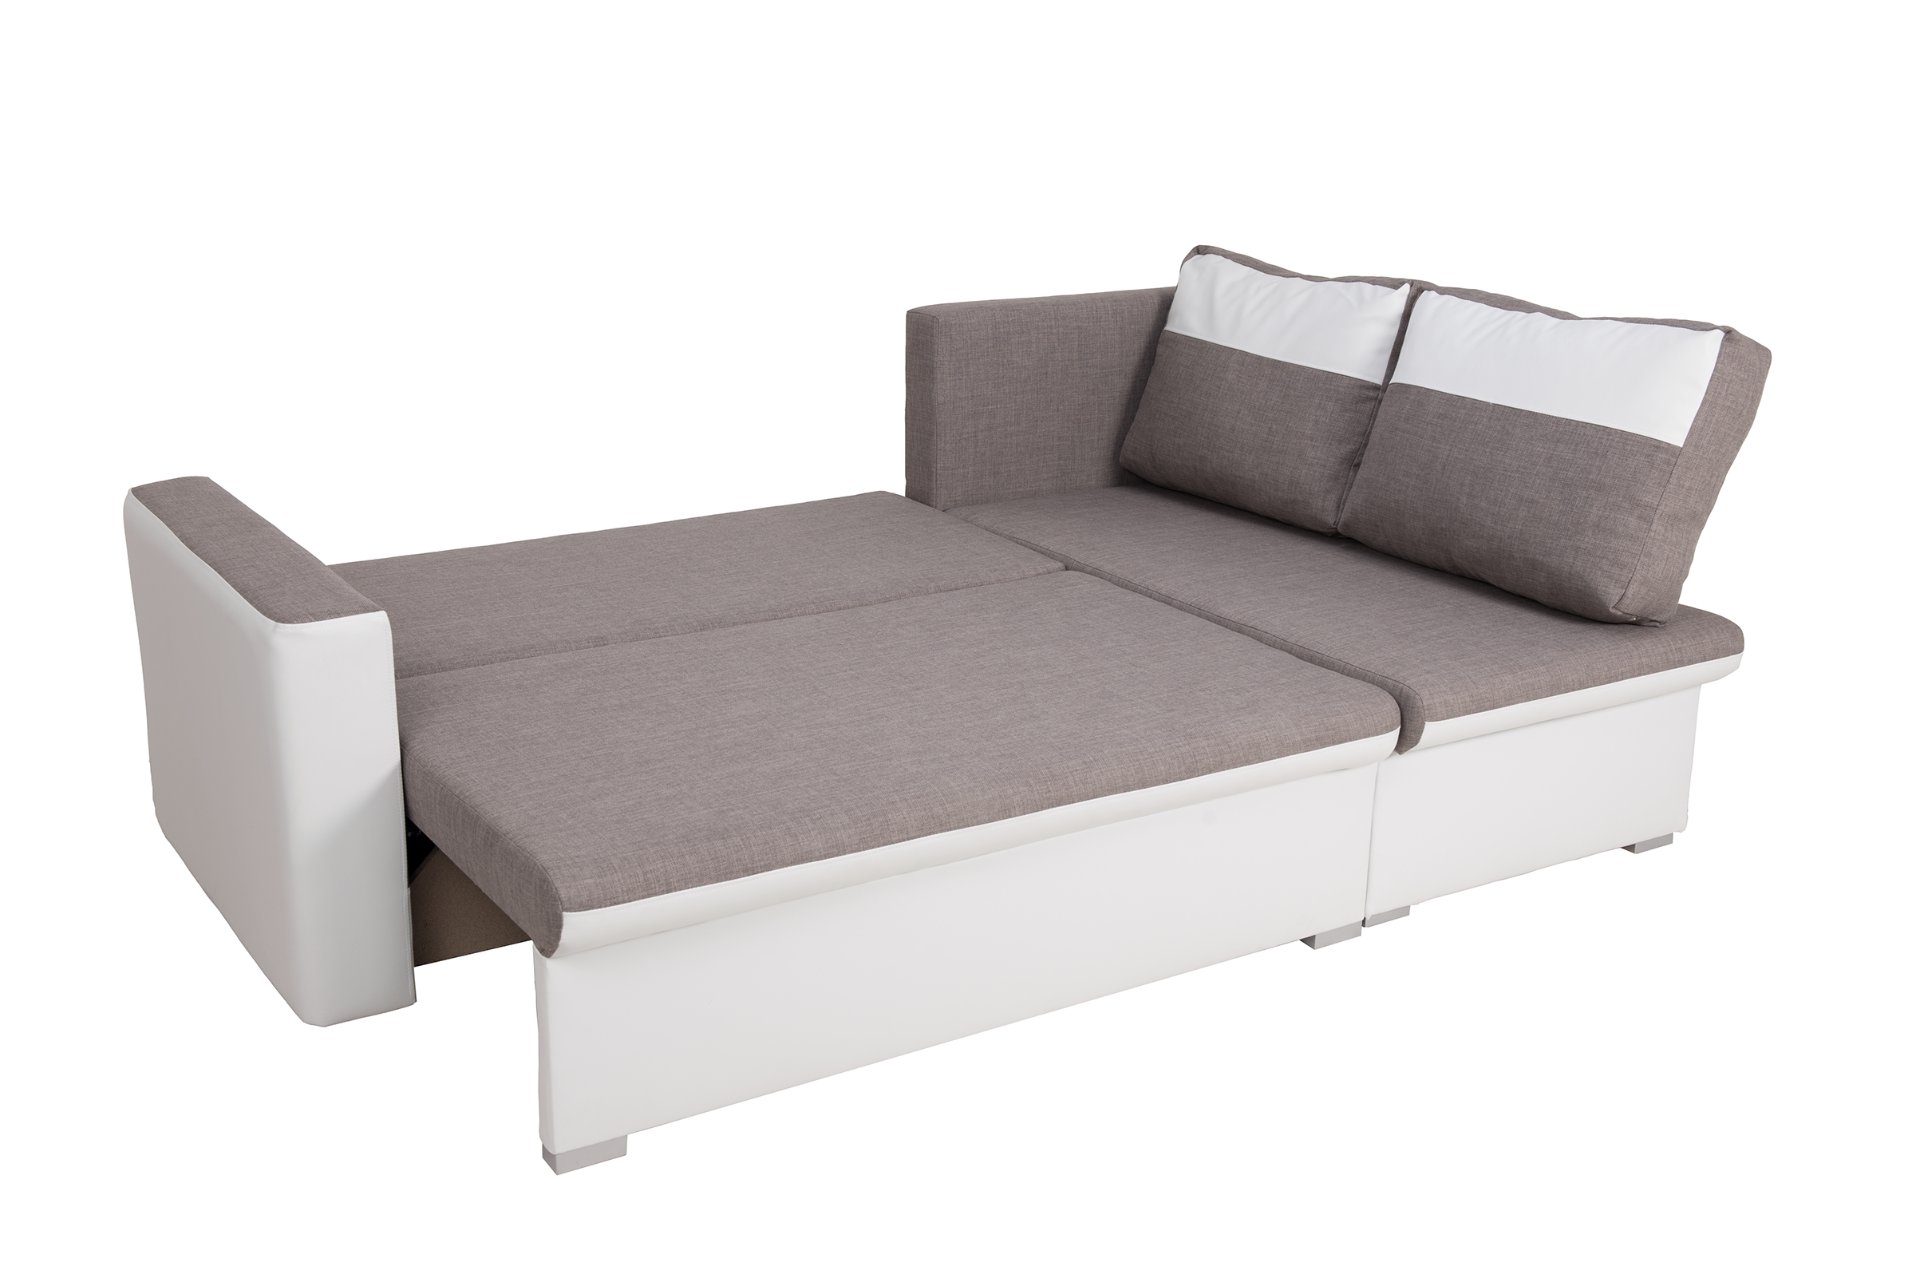 Brand New Flˆvio Right Hand Facing White/Grey Corner Pull Out Sofa Bed With Storage - Image 2 of 3